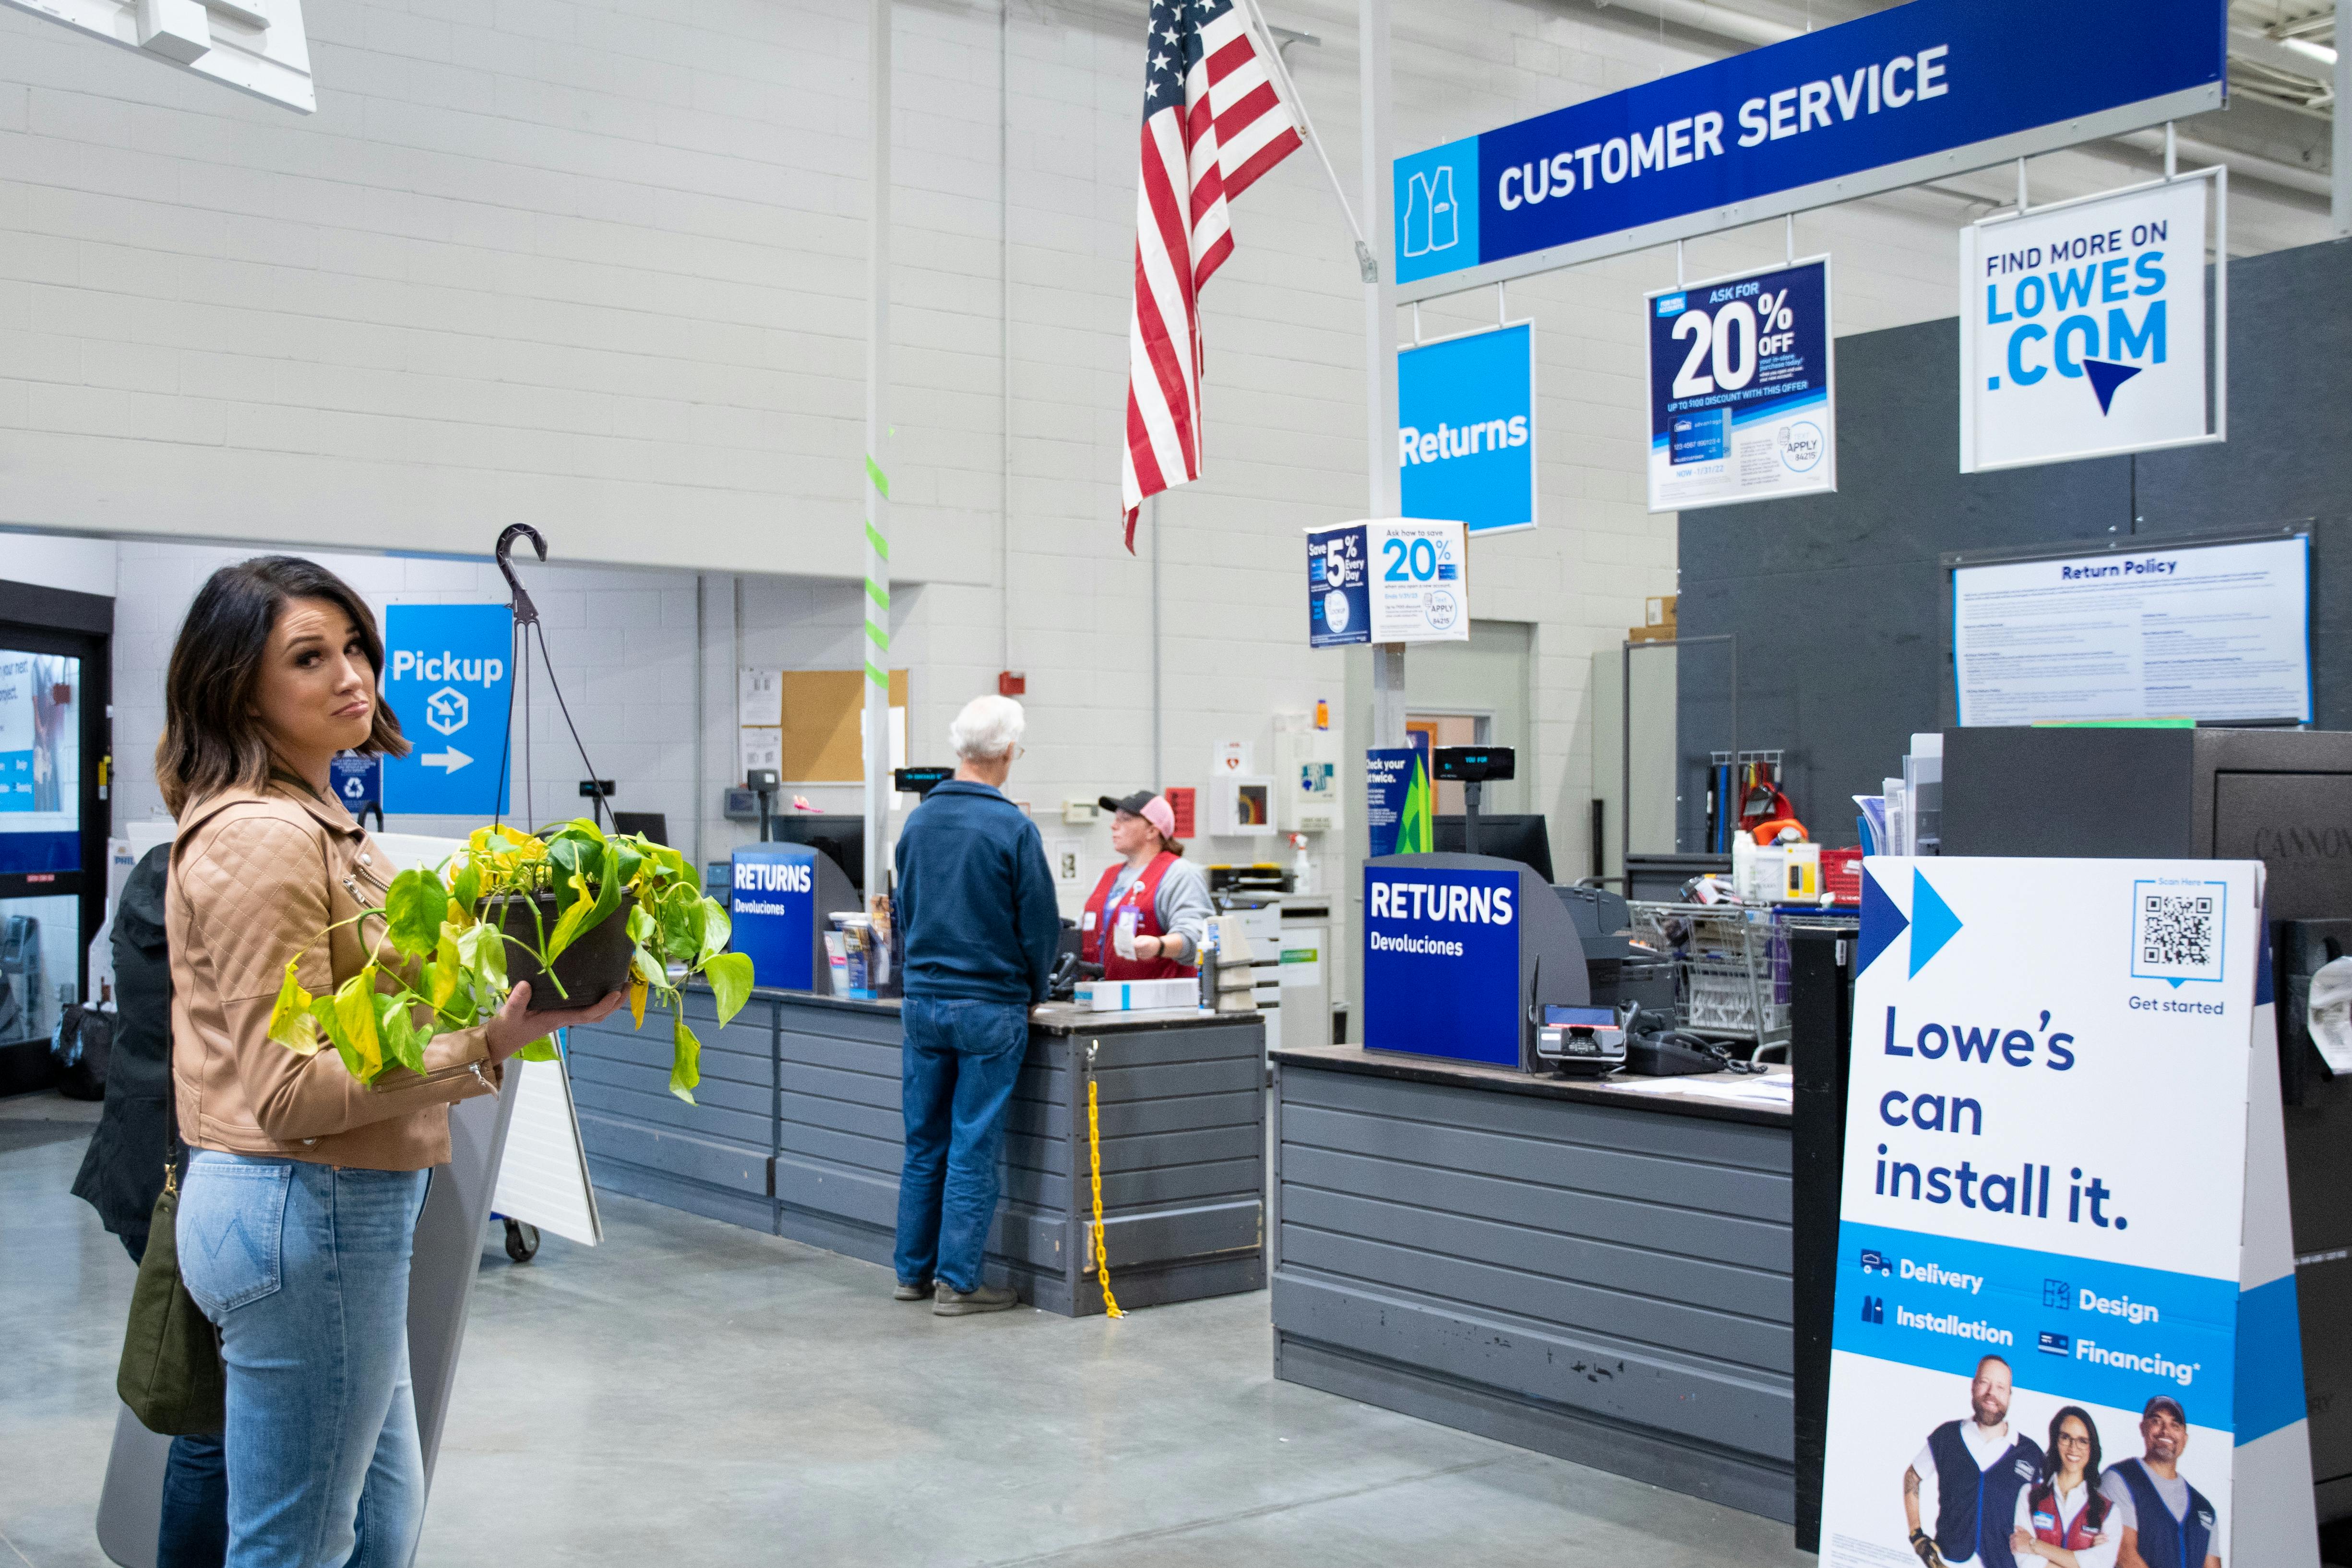 A person standing in line for the customer service desk at Lowe's, holding a dead plant.